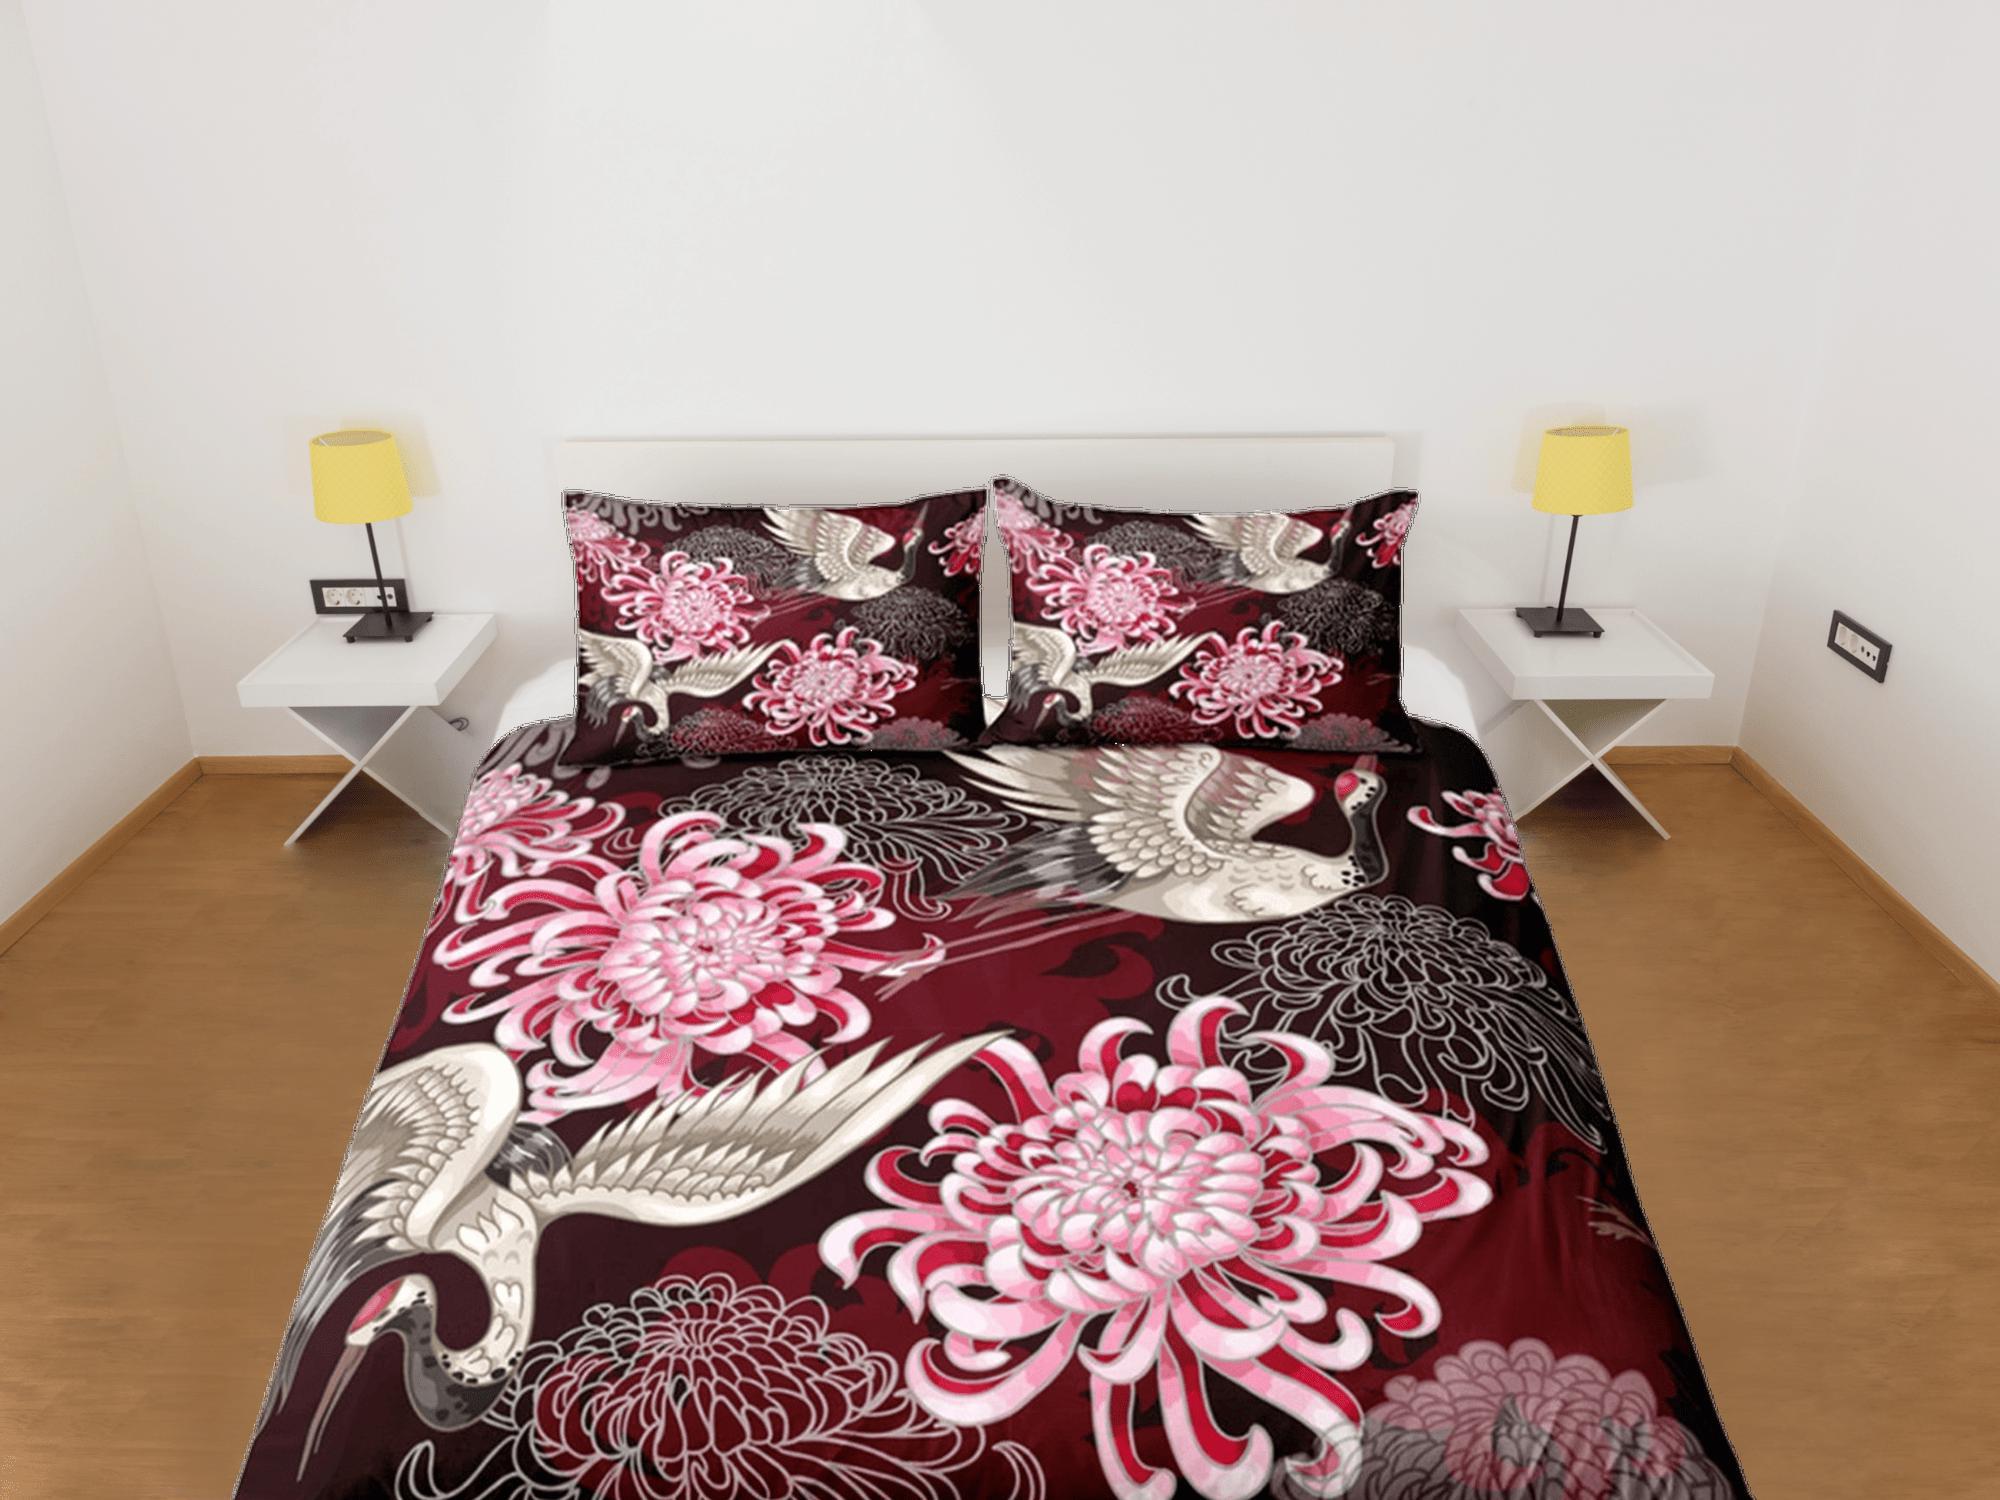 daintyduvet Crane Bird Floral Red Duvet Cover Set Full Japanese Art Dorm Bedding Set with Pillowcase | Size King, Queen, Double, Twin & Single Bedspread